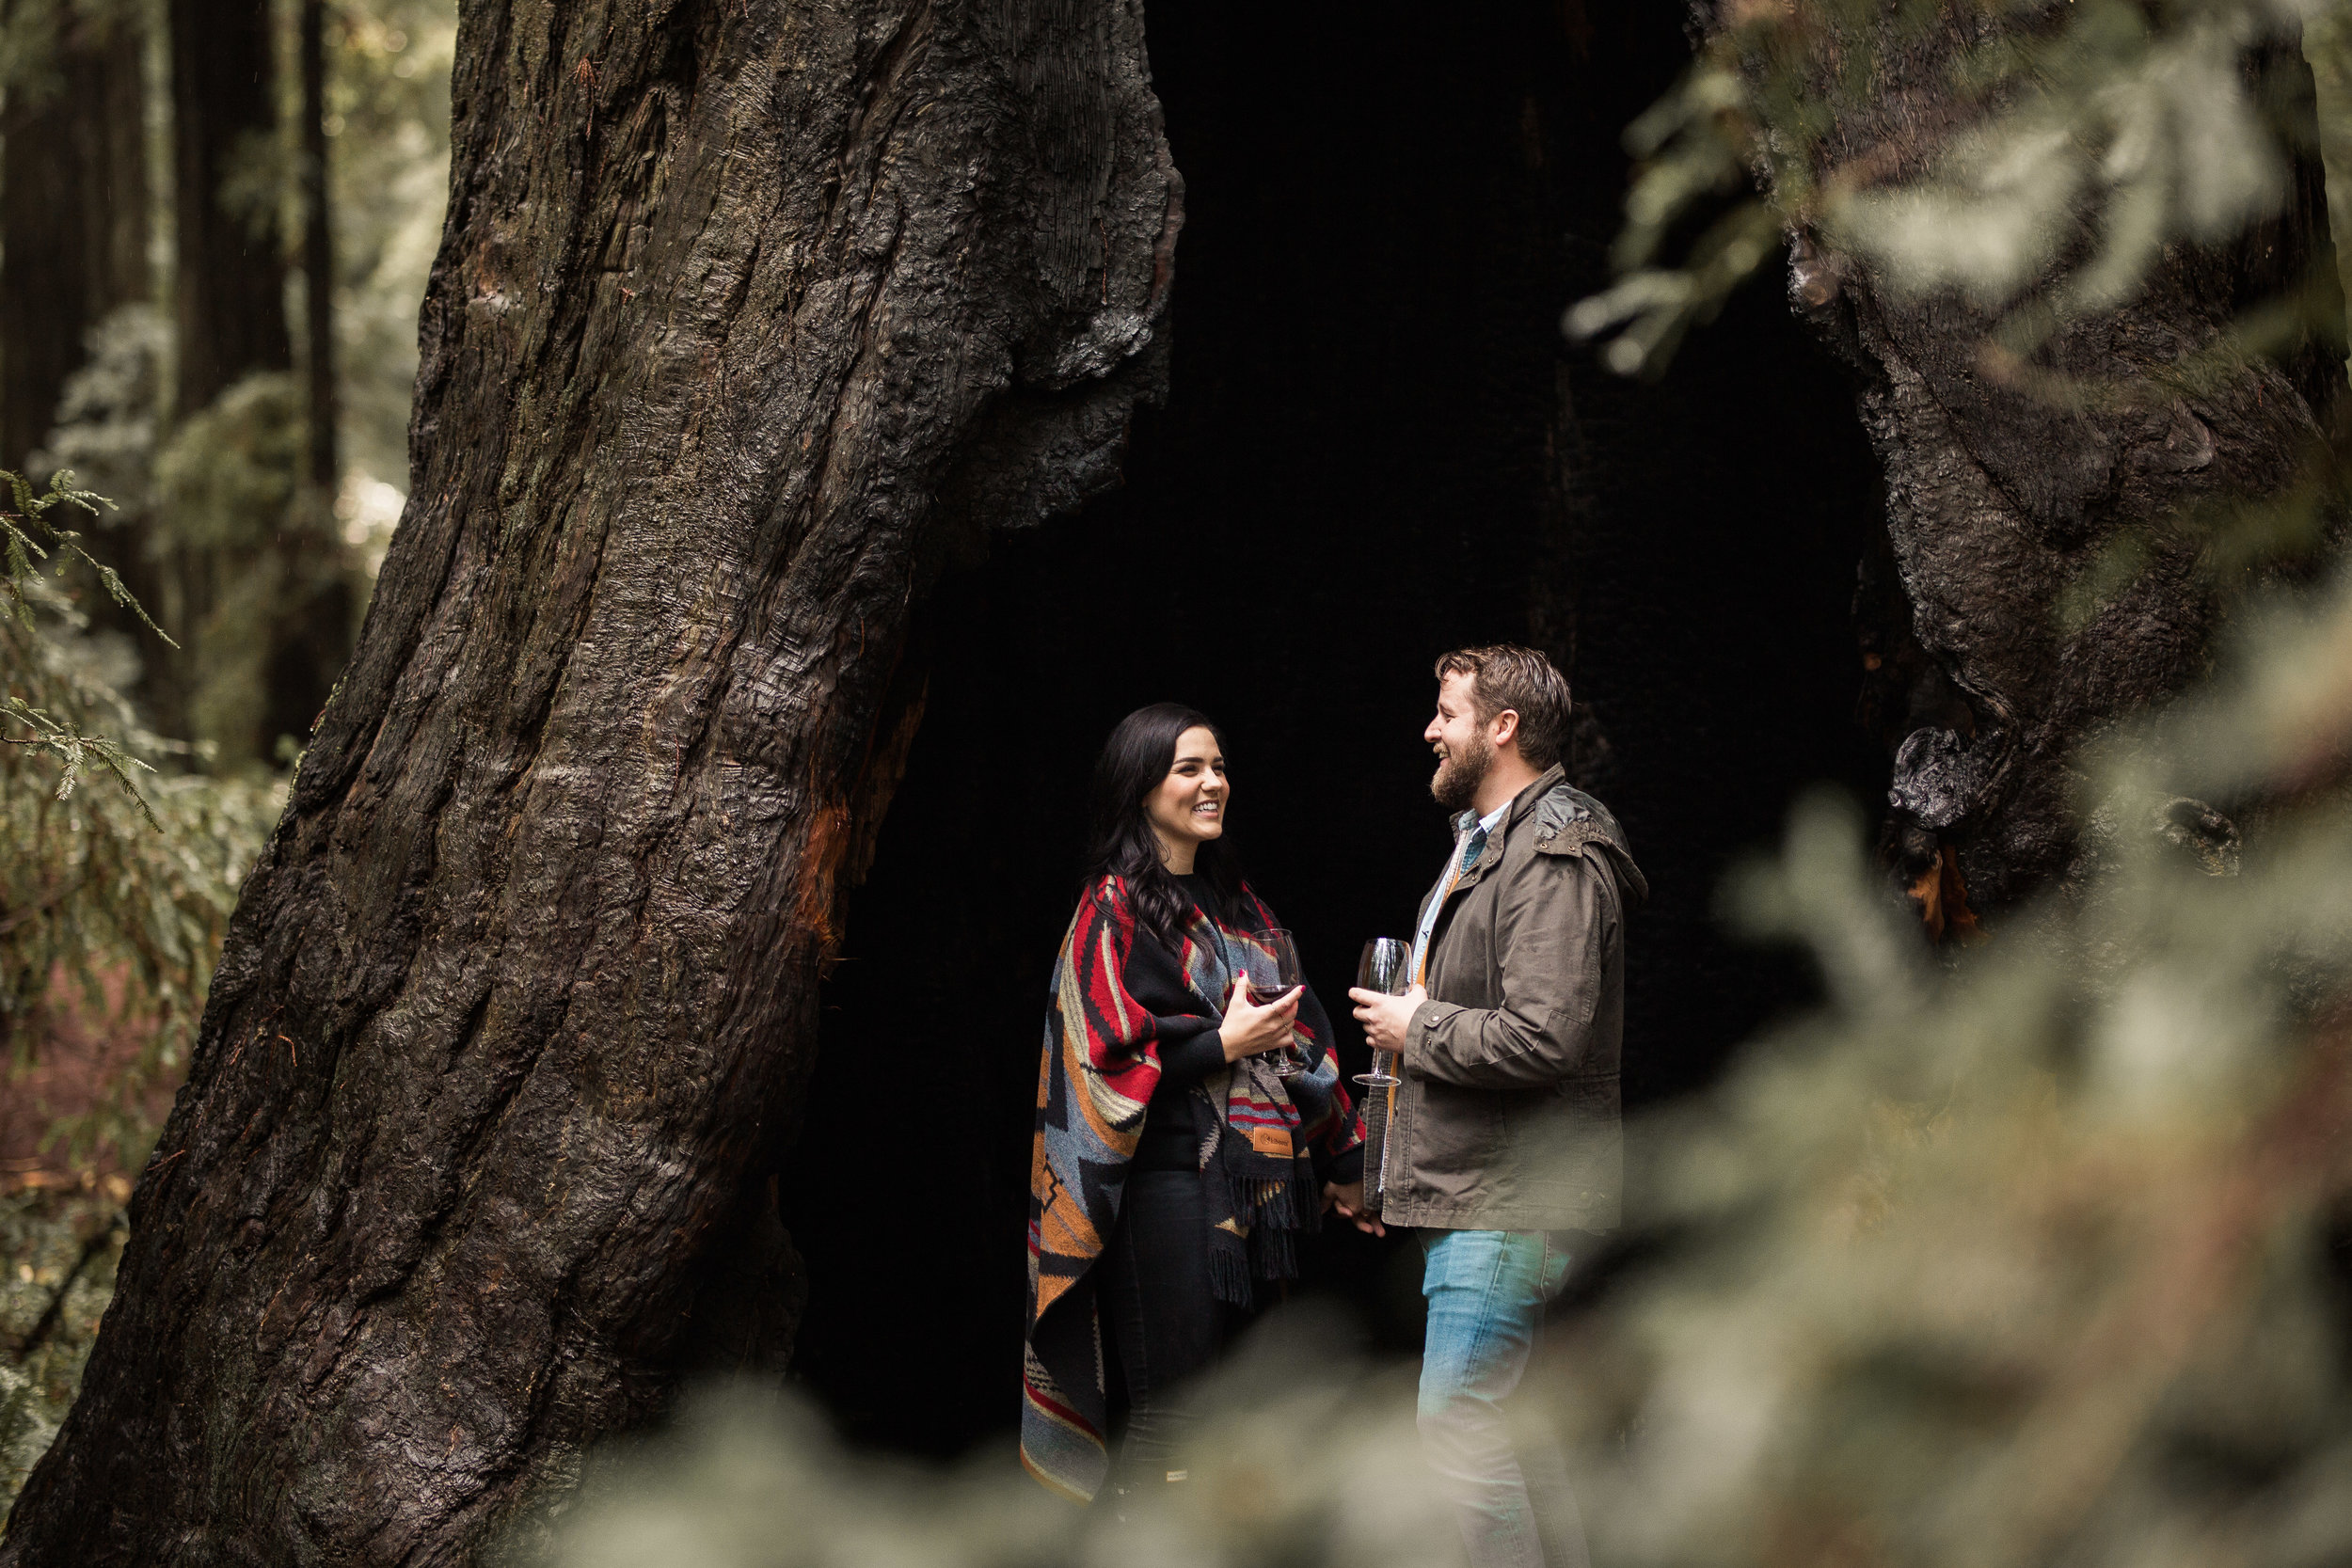 nicole-daacke-photography-redwoods-national-park-forest-rainy-foggy-adventure-engagement-session-humboldt-county-old-growth-redwood-tree-elopement-intimate-wedding-photographer-9.jpg